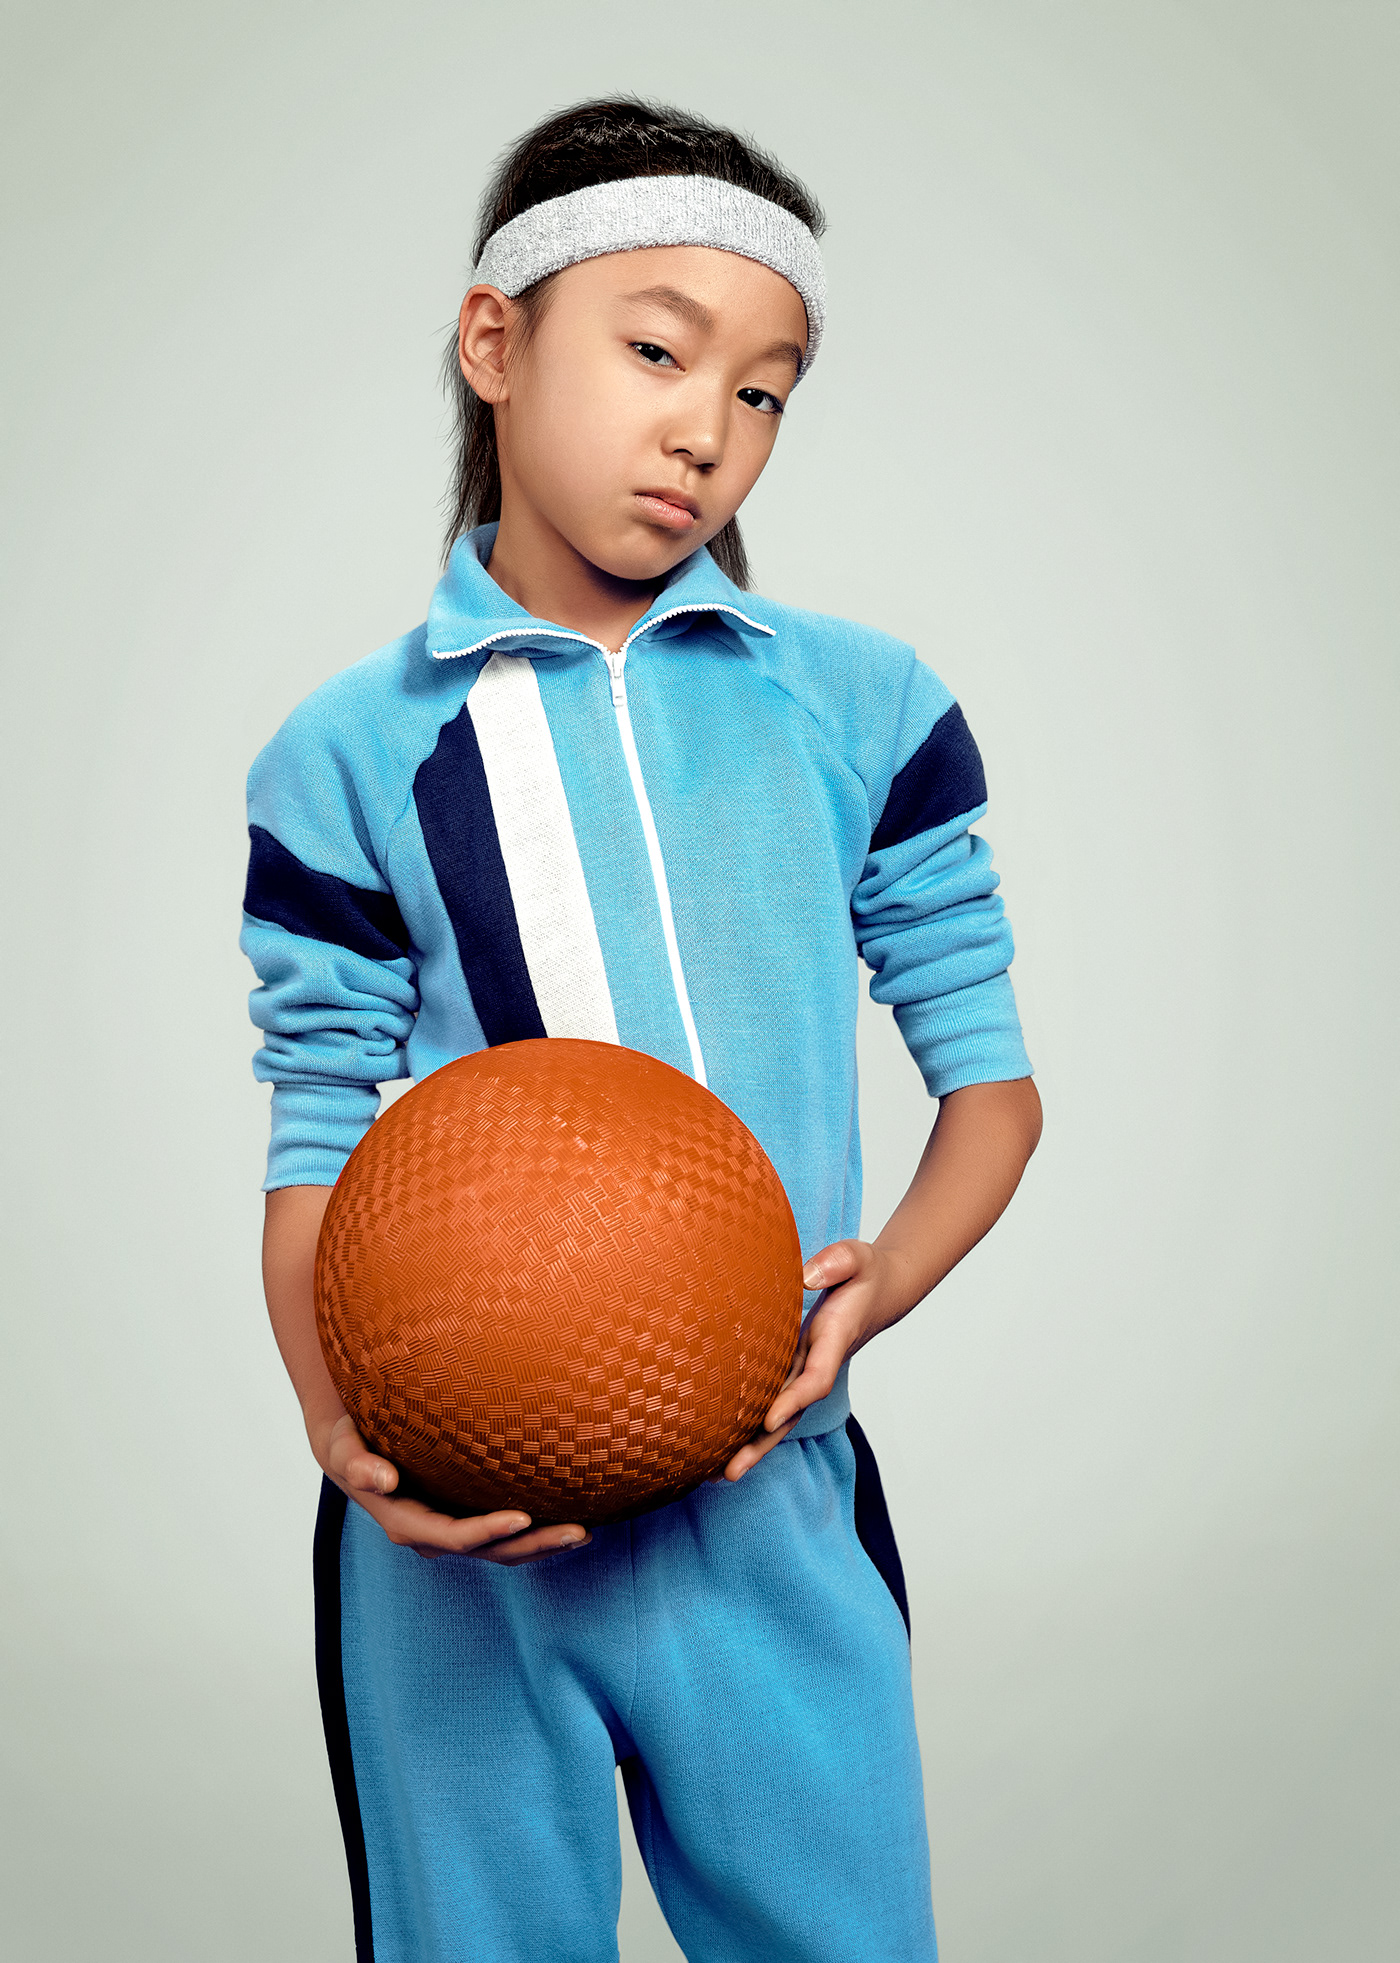 sports children kids athlete Character norman rockwell series underdog color story retouching 